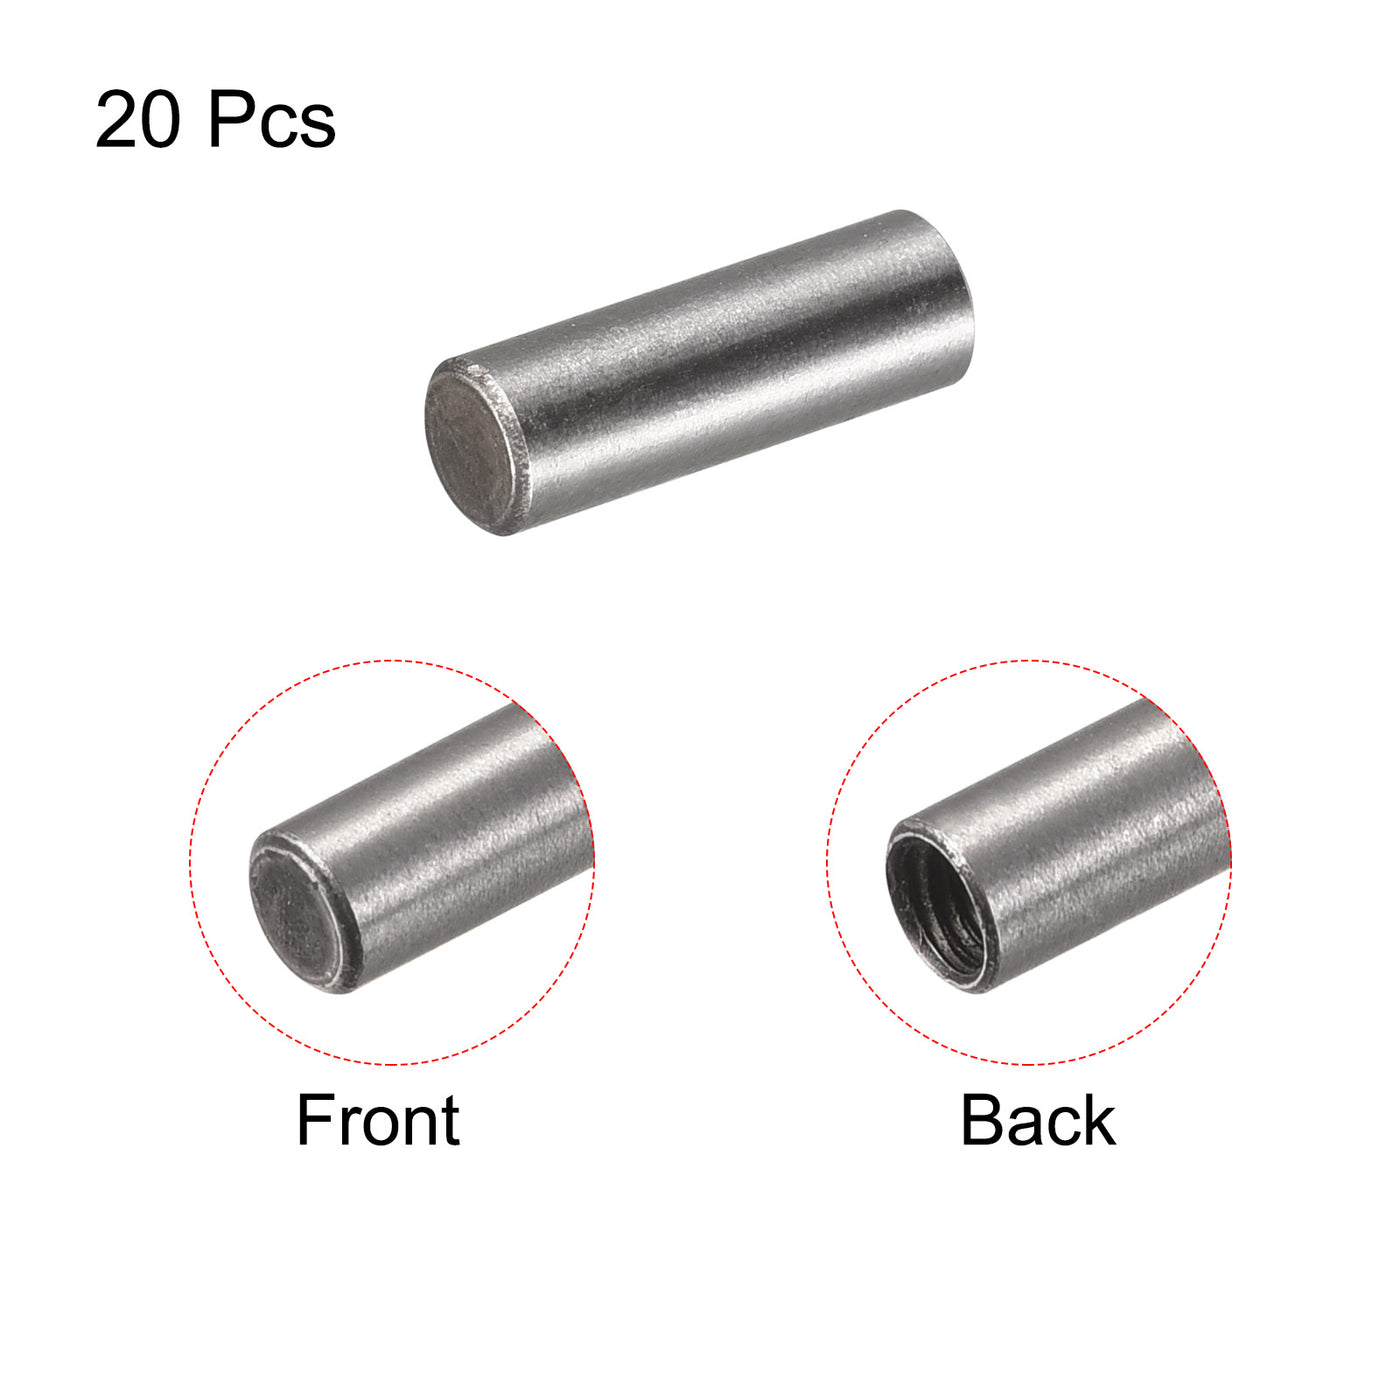 uxcell Uxcell Carbon Steel Dowel Pin 4 x 12mm M3 Female Thread Cylindrical Shelf Support Pin 20Pcs